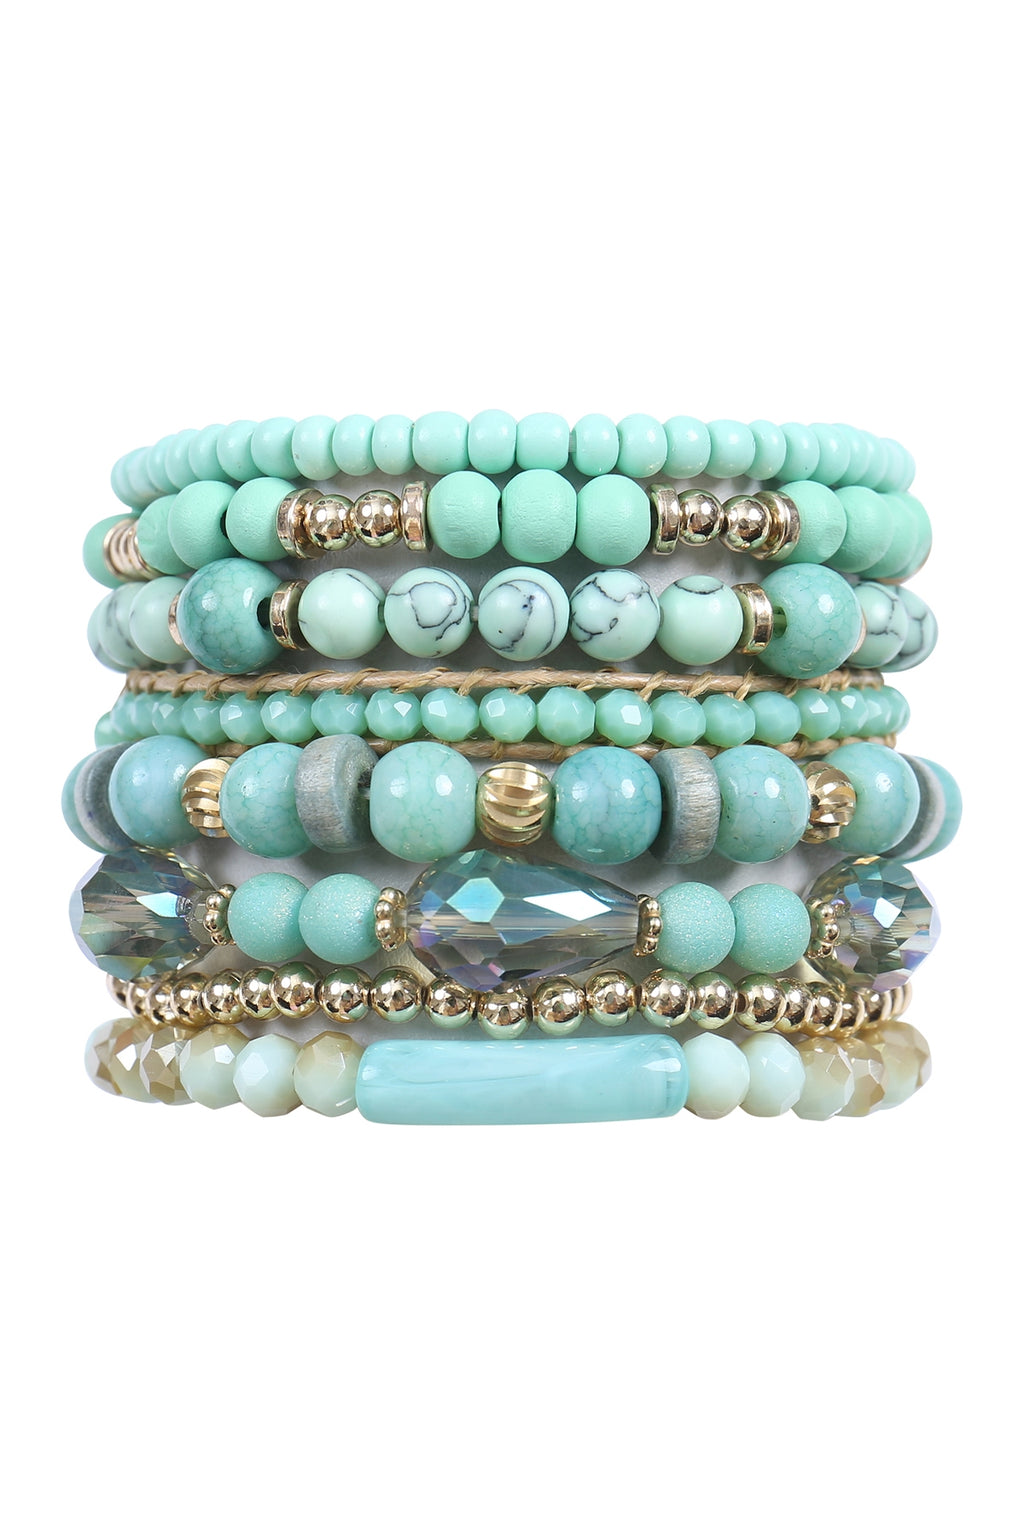 Charm Mix Beads Natural Stone Wood Layered Stackable Versatile Bracelet Set Amazonite - Pack of 6